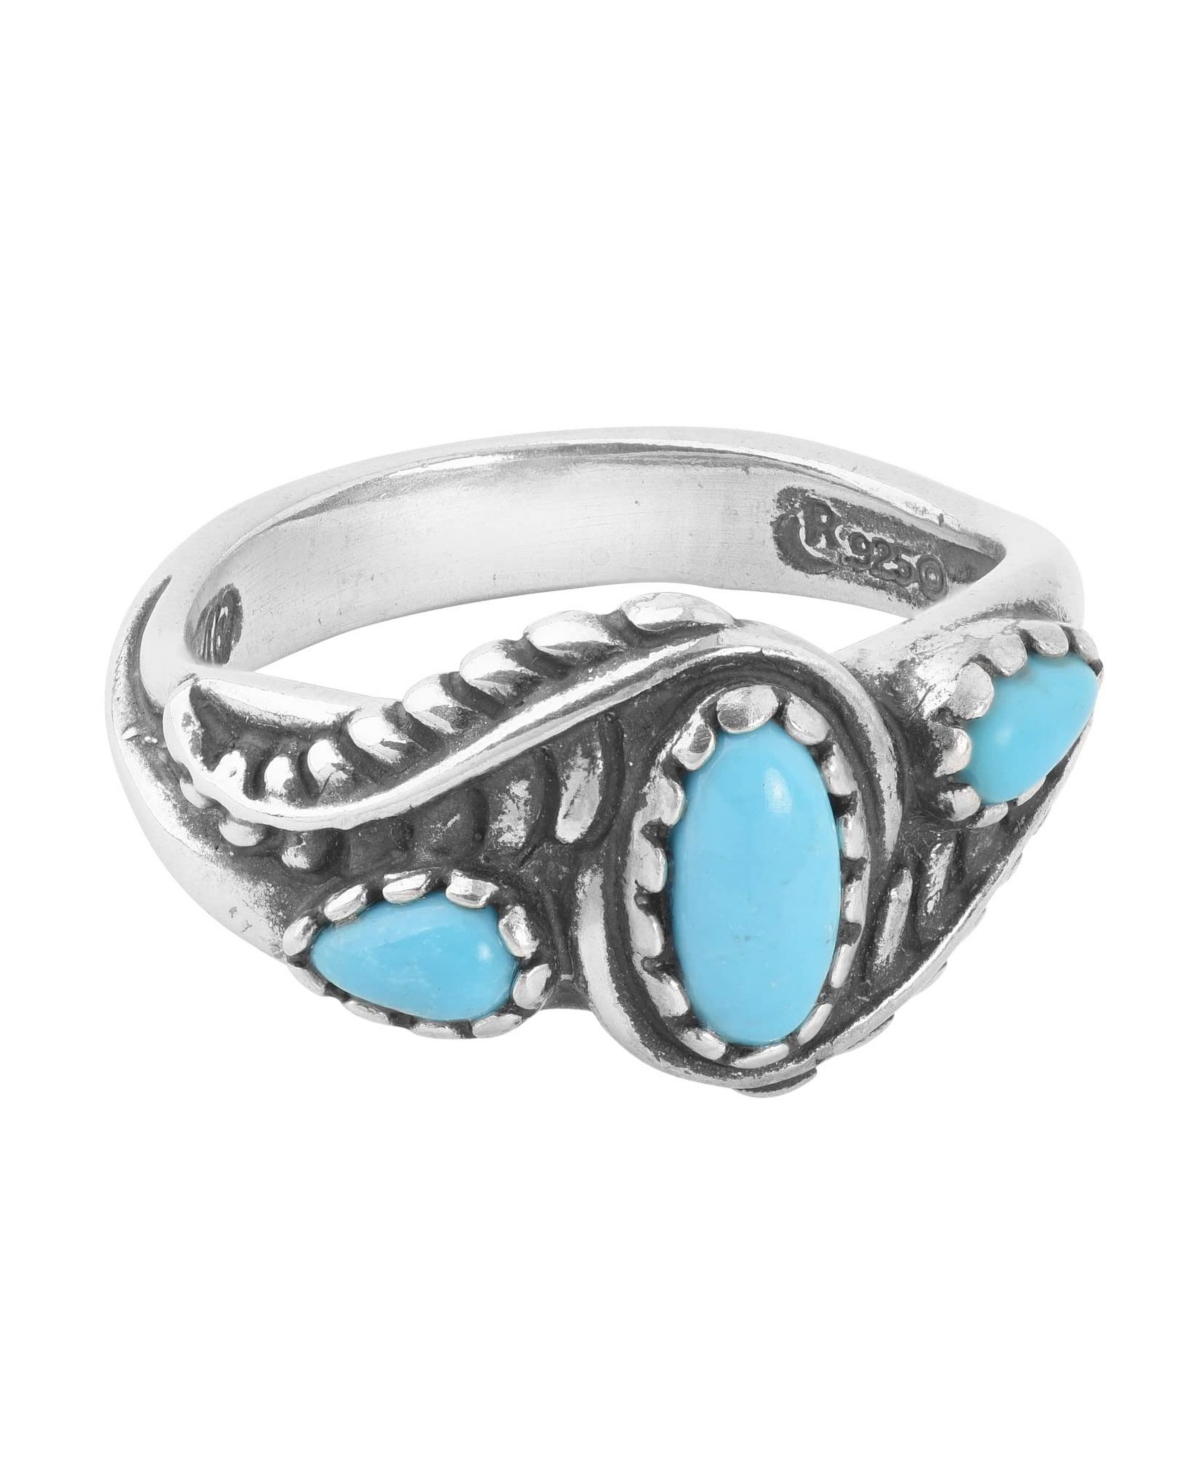 Sterling Silver and Genuine Gemstone Leaf Rosette Design 3-Stone Ring, Sizes 5-10 - Blue turquoise